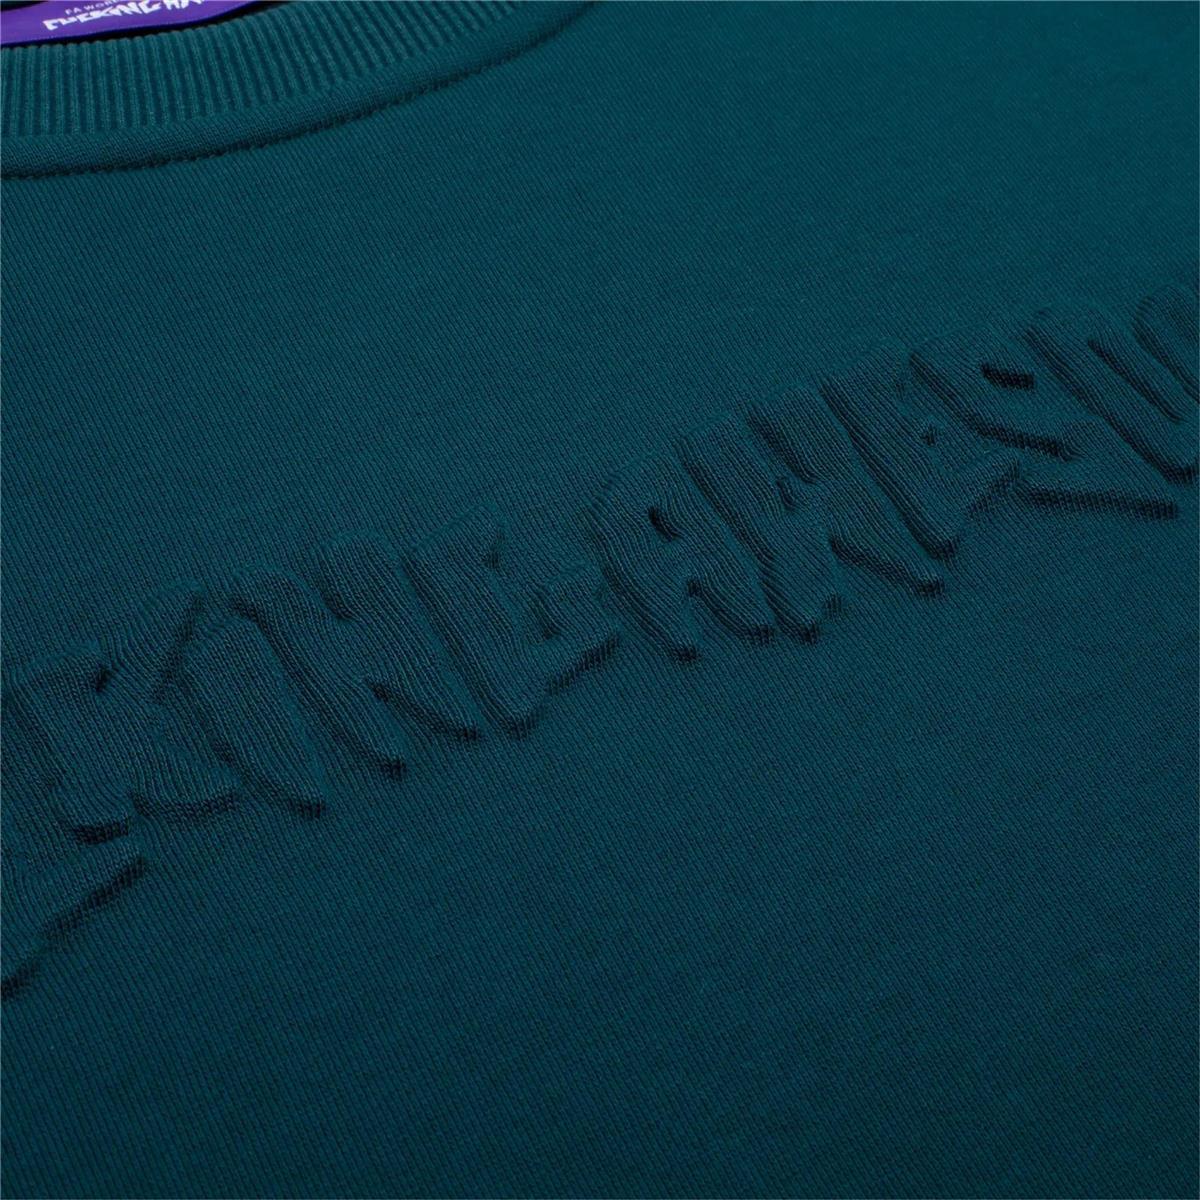 Fucking Awesome - Stamp Embossed Crew Teal - Teal